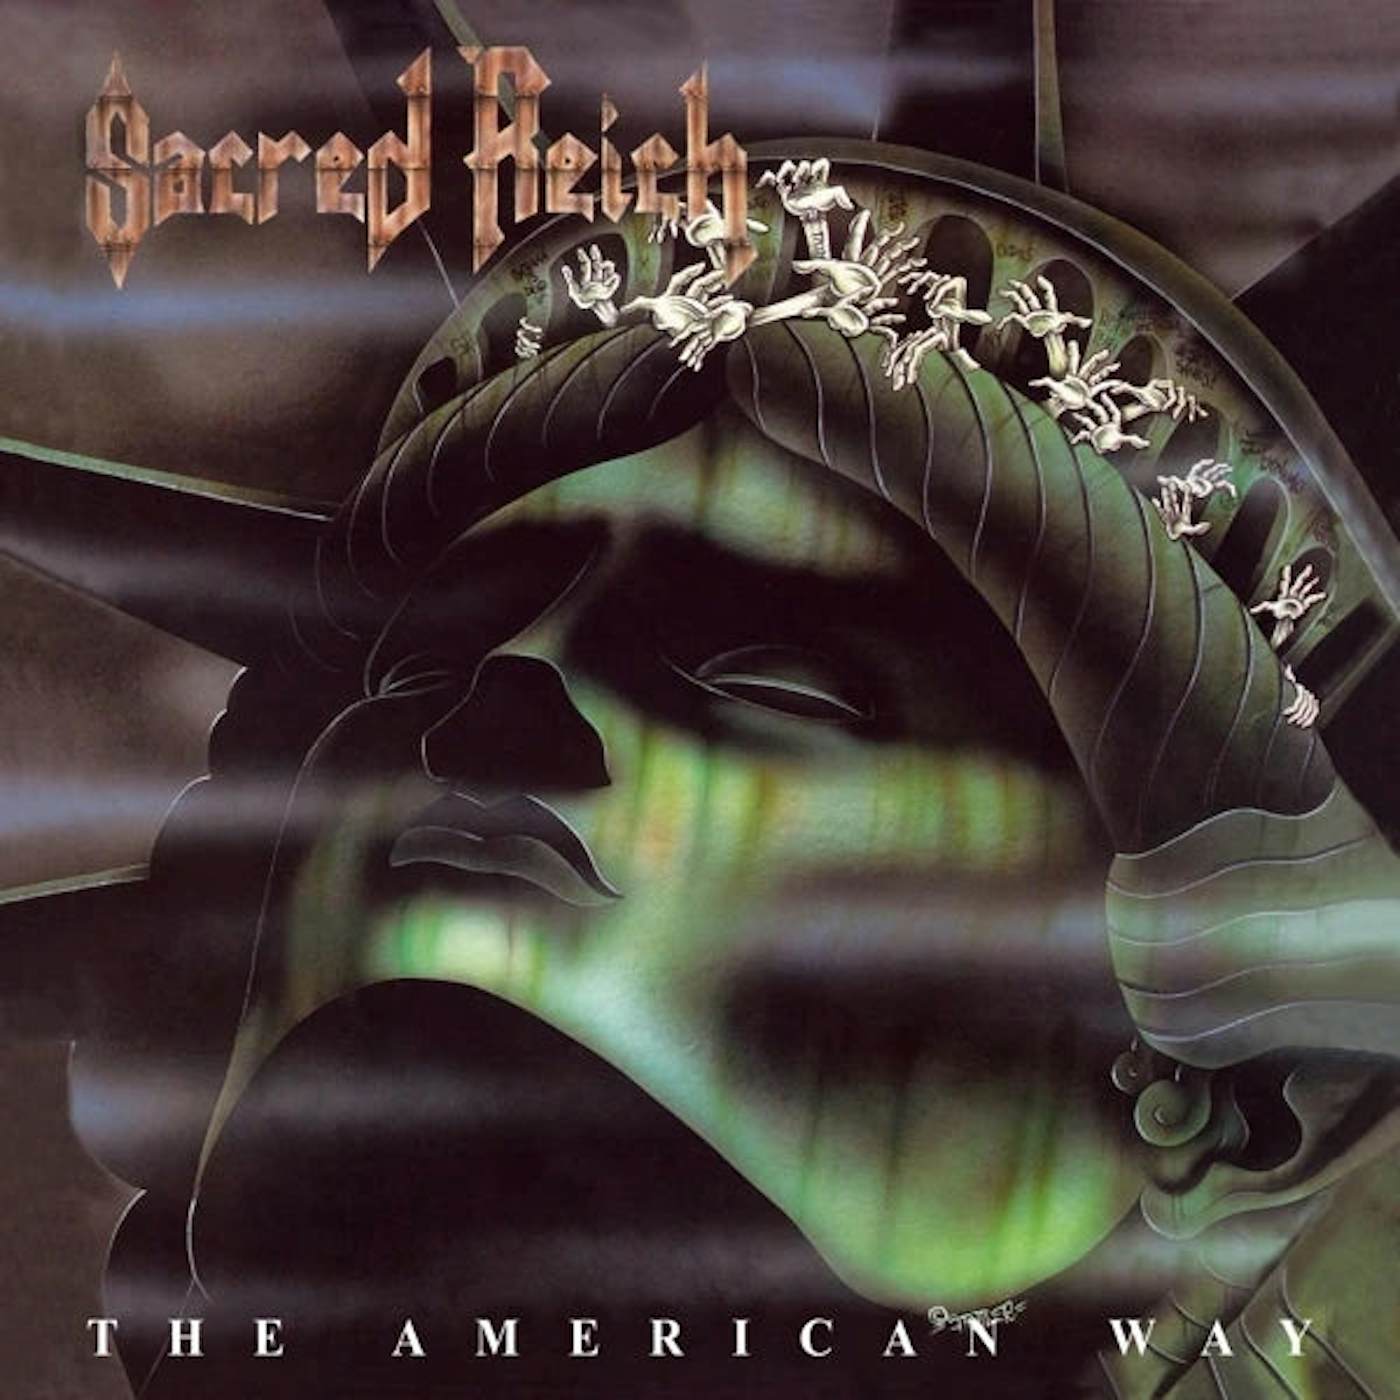 Sacred Reich Sacred Reigh - The American Way